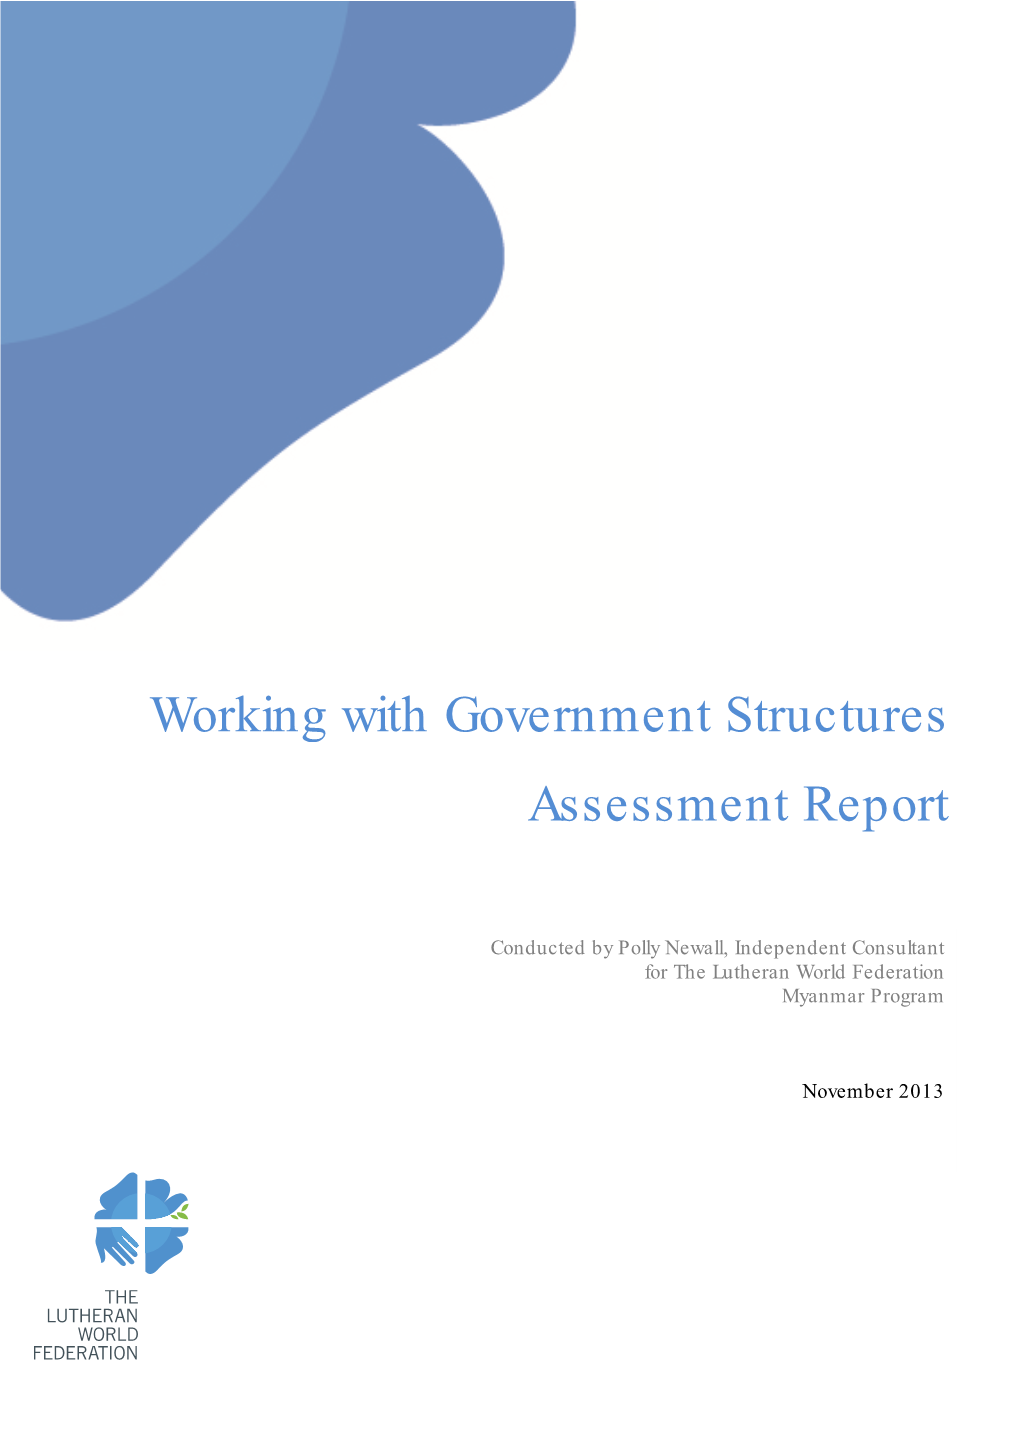 Working with Government Structures Assessment Report